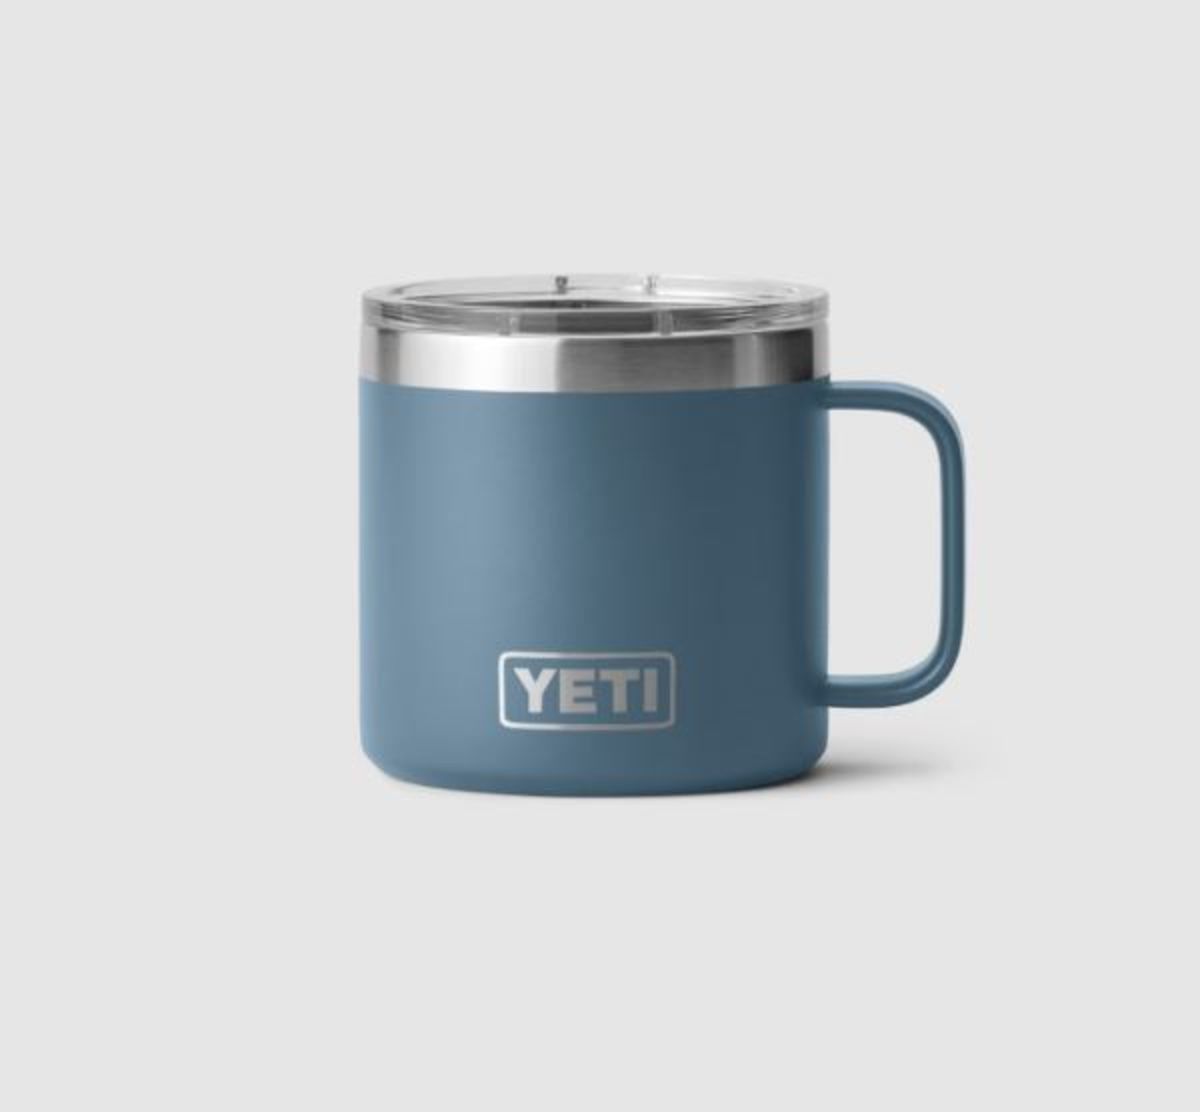 Yeti Is Having a Rare Sale on Its Shopper-Loved Rambler Mugs, and